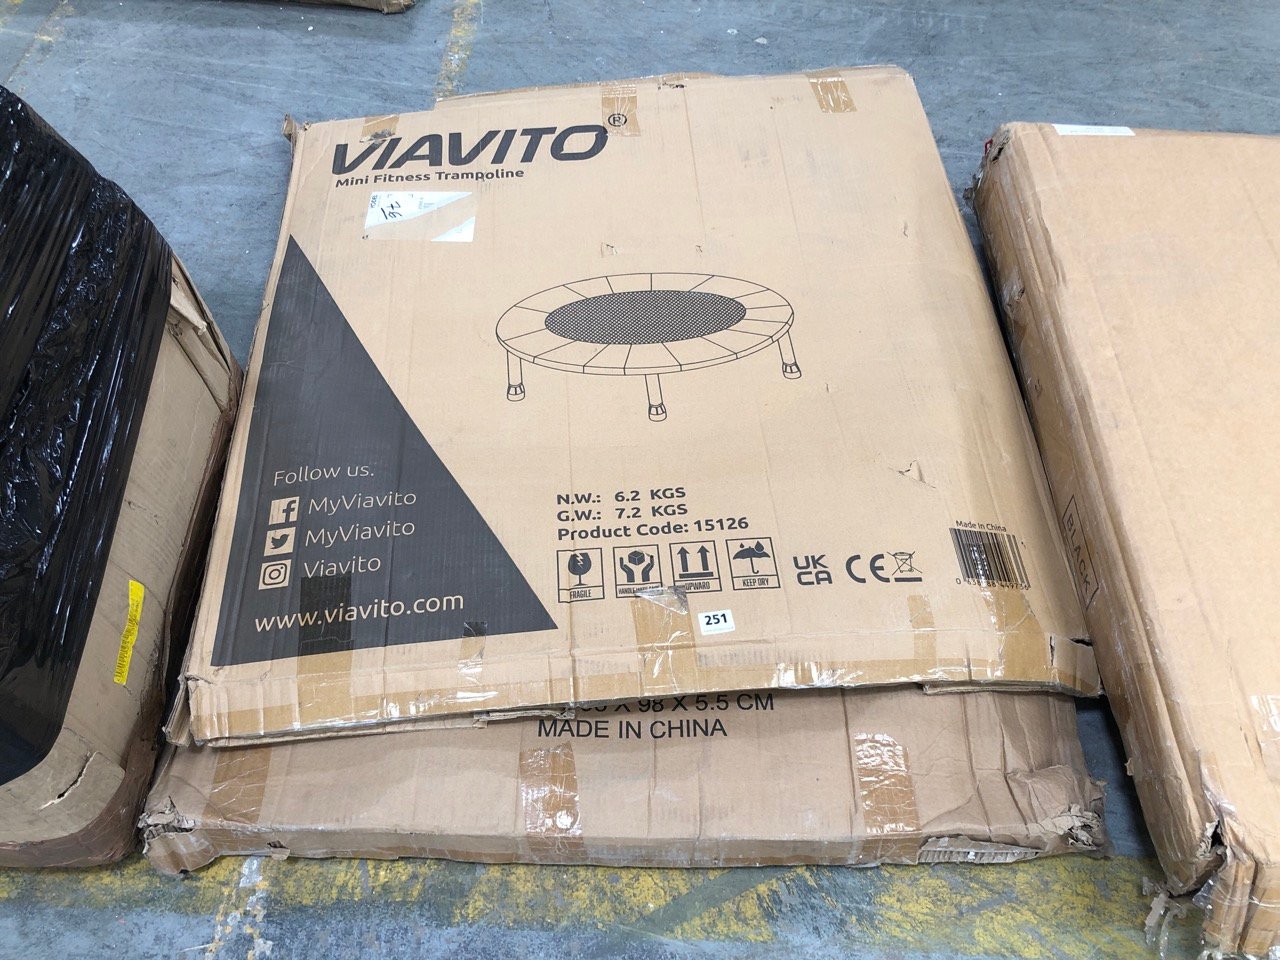 2 X VIAVITO MINI FITNESS TRAMPOLINE (COLLECTION OR OPTIONAL DELIVERY)